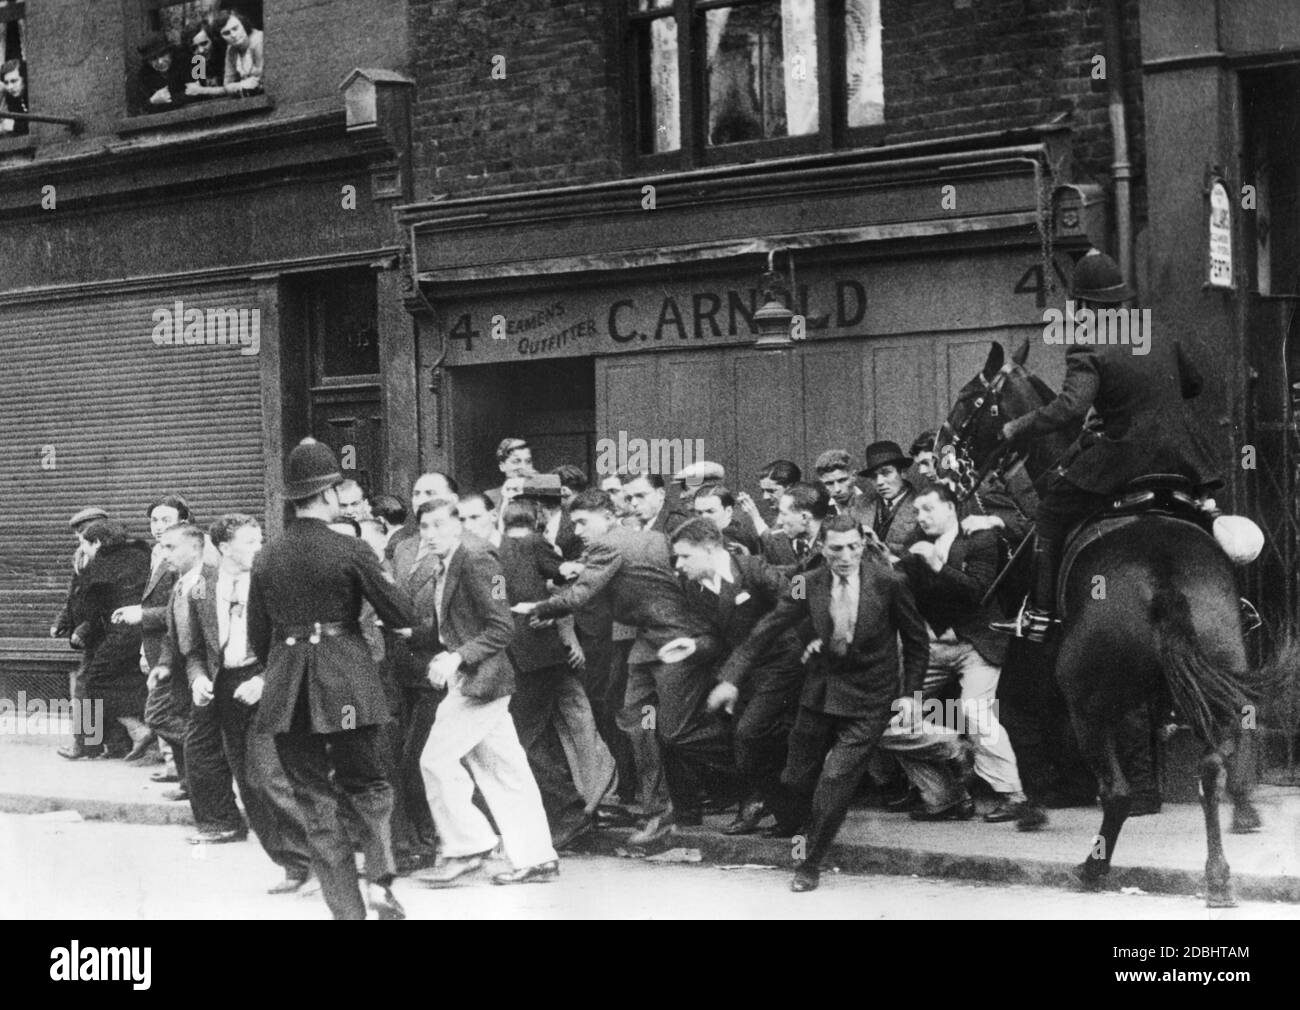 'Clashes between demonstrators and police in London. On the occasion of a planned march of the ''British Union of Fascists'' (BUF) through Whitechapel, numerous counter-demonstrators had gathered in London.' Stock Photo